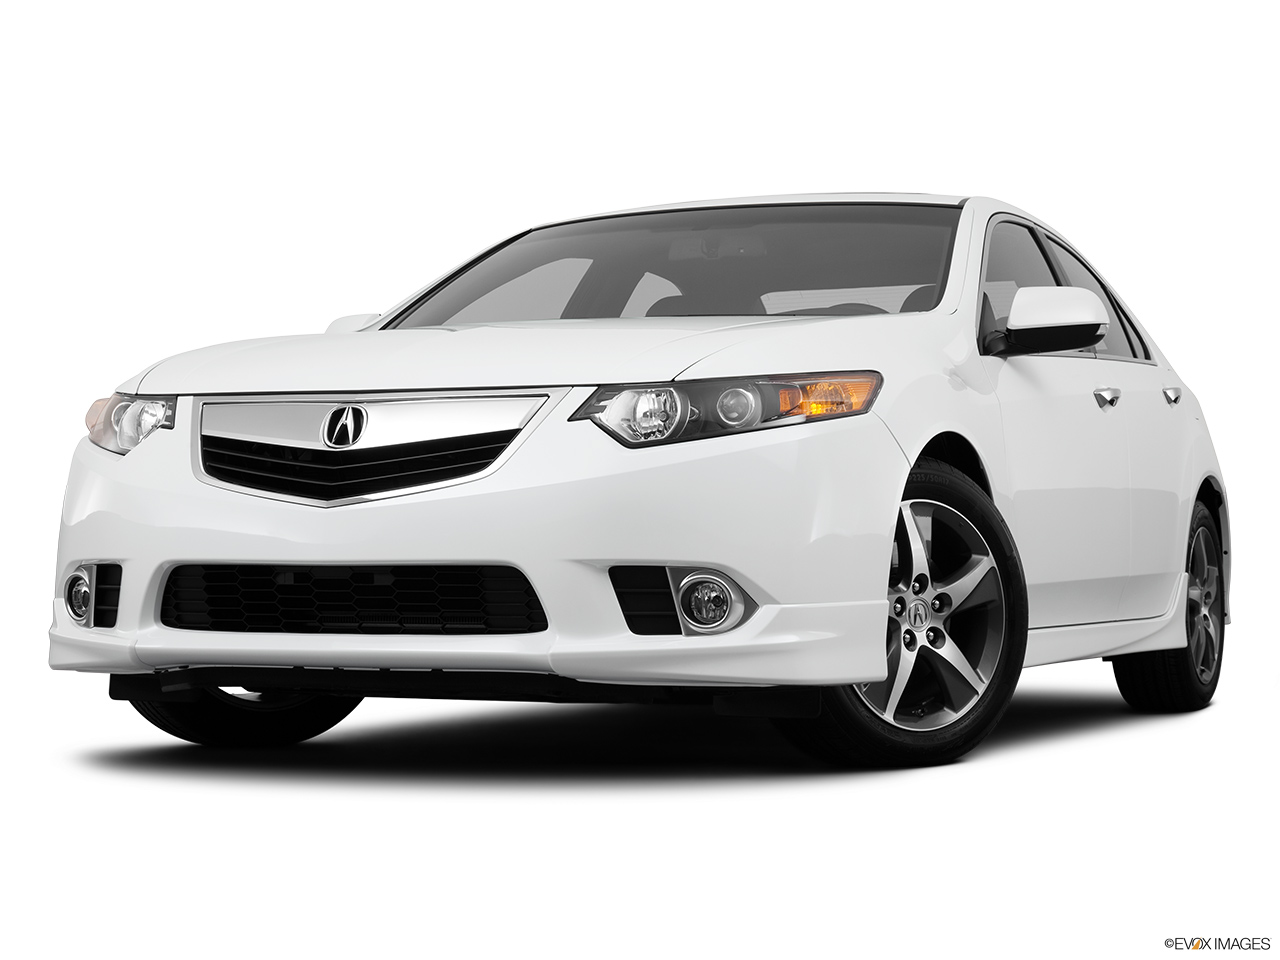 2013 Acura TSX Special Edition 5-Speed Automatic Front angle view, low wide perspective. 